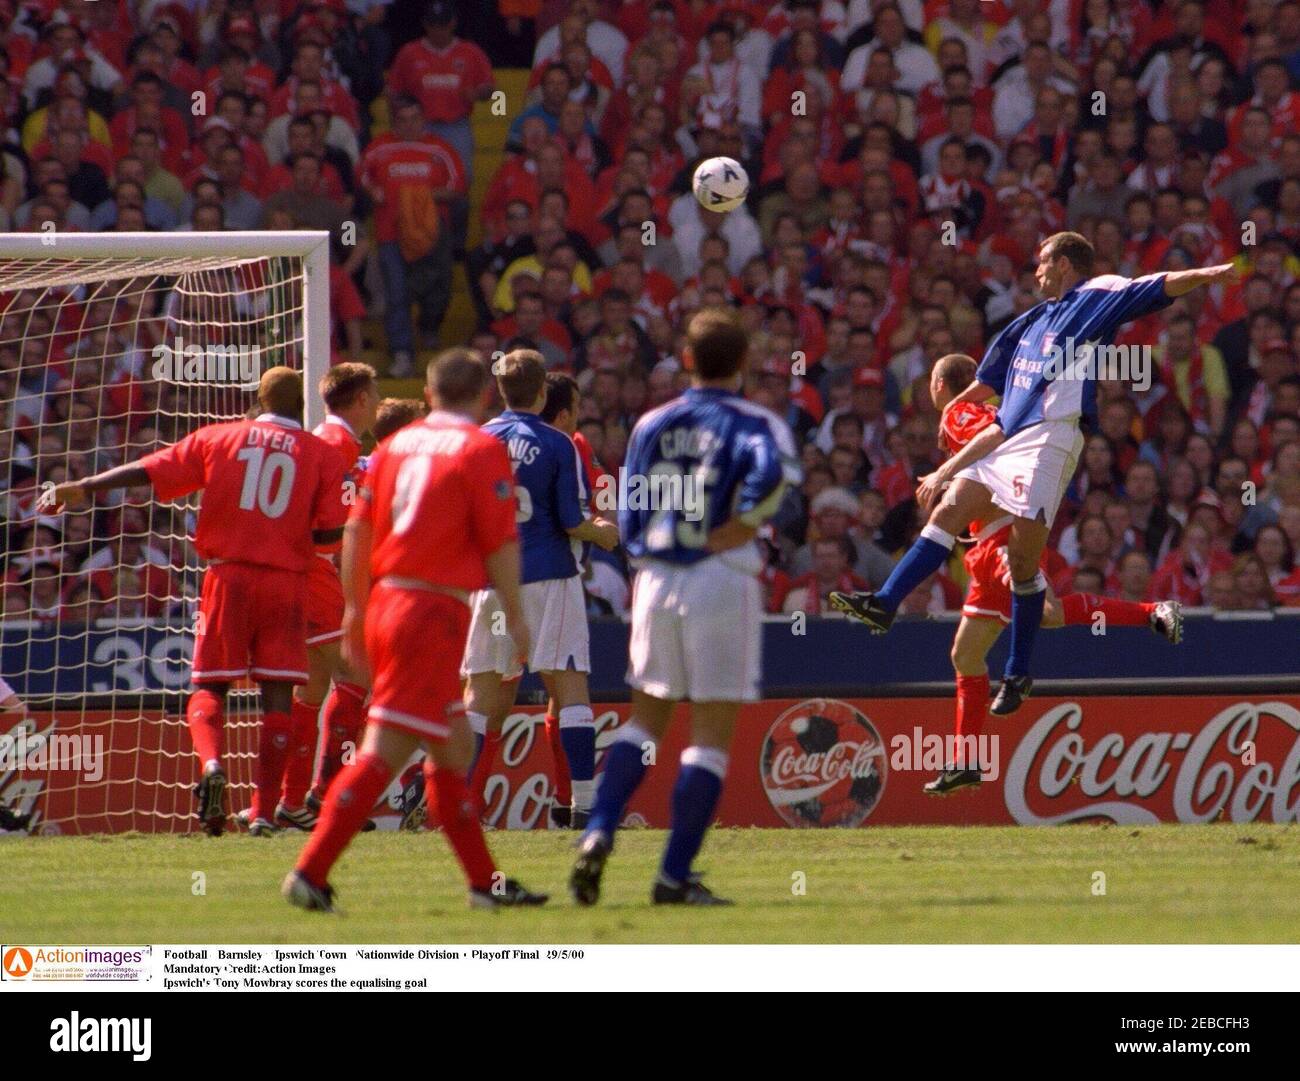 Football - Barnsley v Ipswich Town , Nationwide Division 1 Playoff Final  29/5/00  Mandatory Credit:Action Images  Ipswich's Tony Mowbray scores the equalising goal Stock Photo